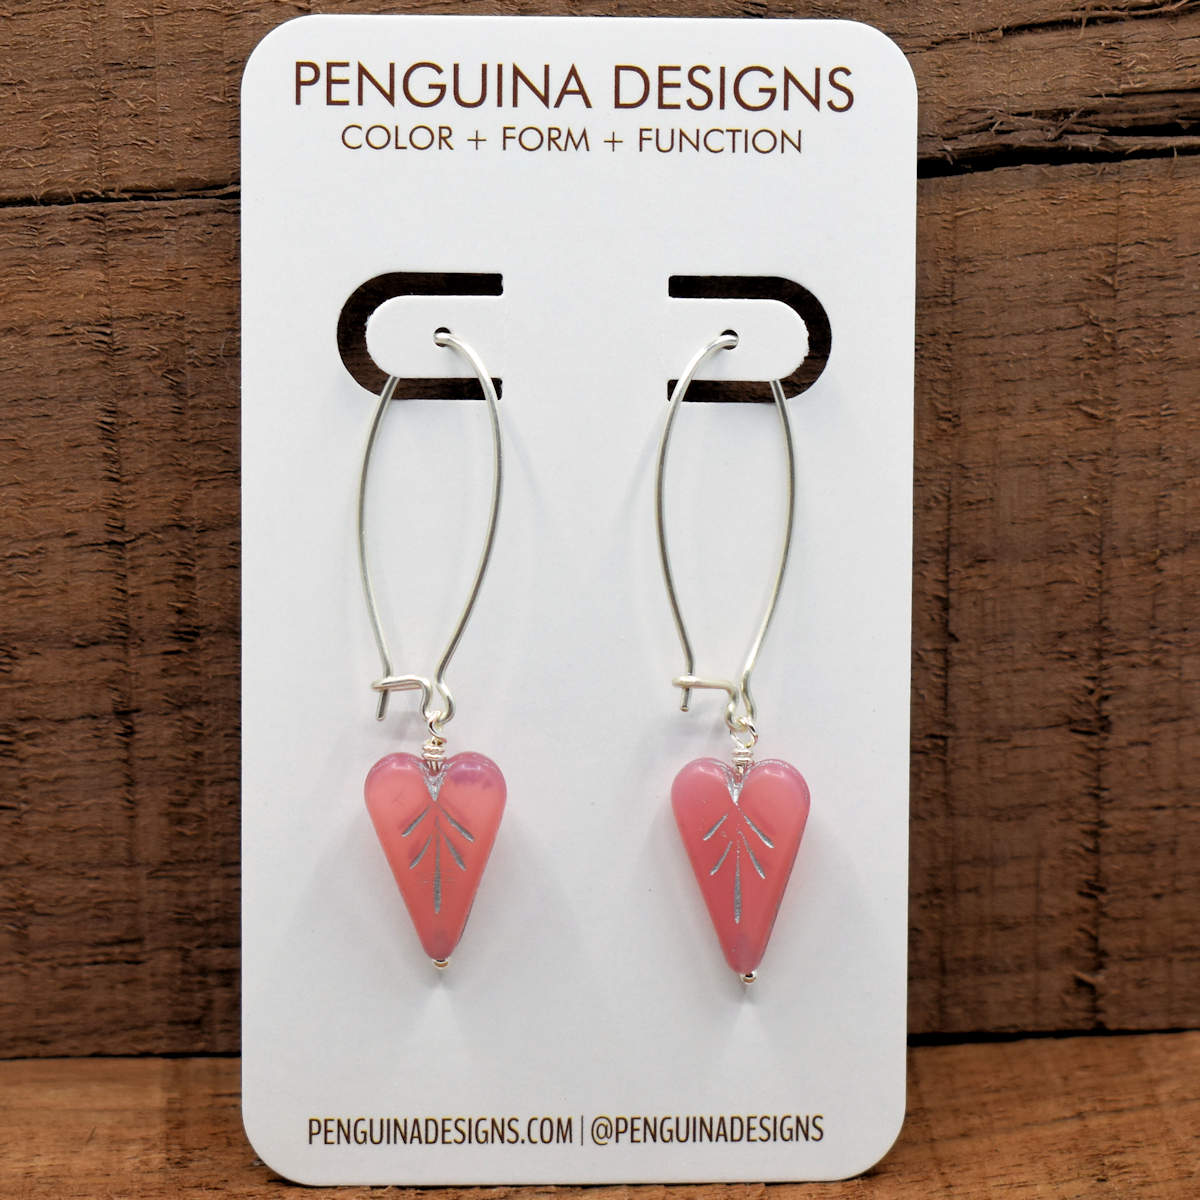 A pair of earrings on a white card rest against a wood background. The earrings have long silver oval wires that latch and slightly translucent pink elongated hearts at the bottom.